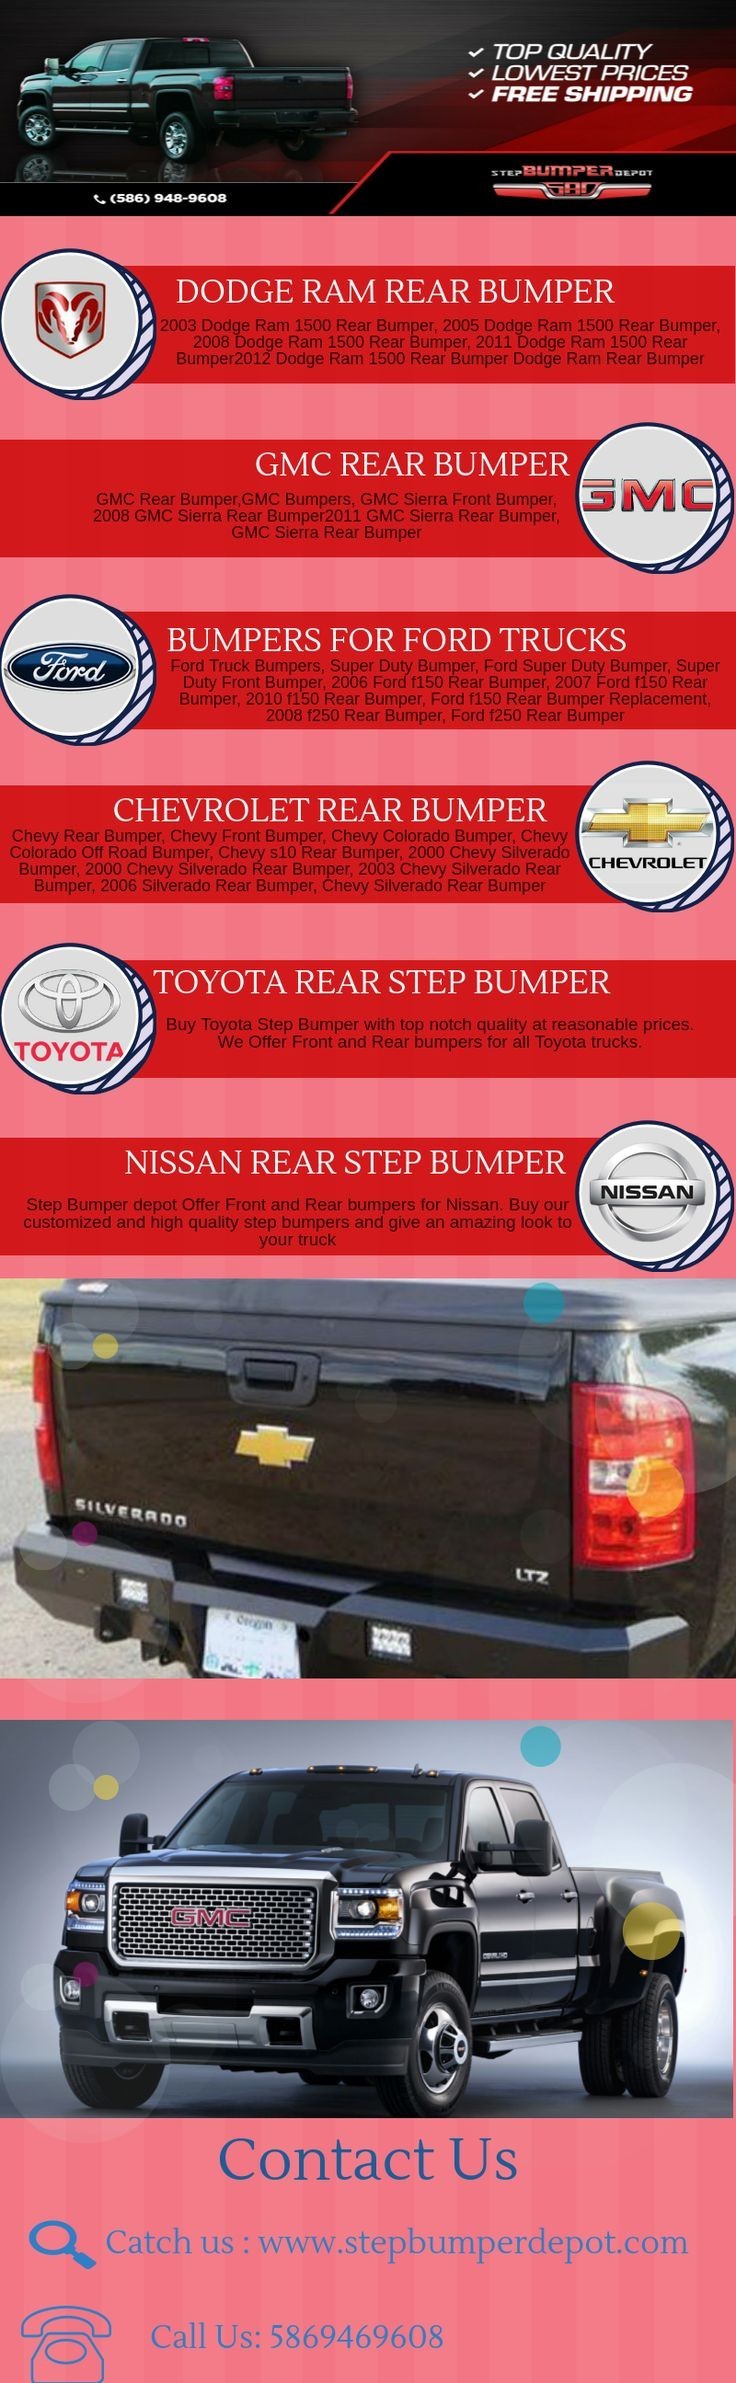 Looking for Step bumpers for your truck Get rear front bumpers step bumpers 41 best Chevy Truck Bumpers images on Pinterest from 2003 s10 tail lights